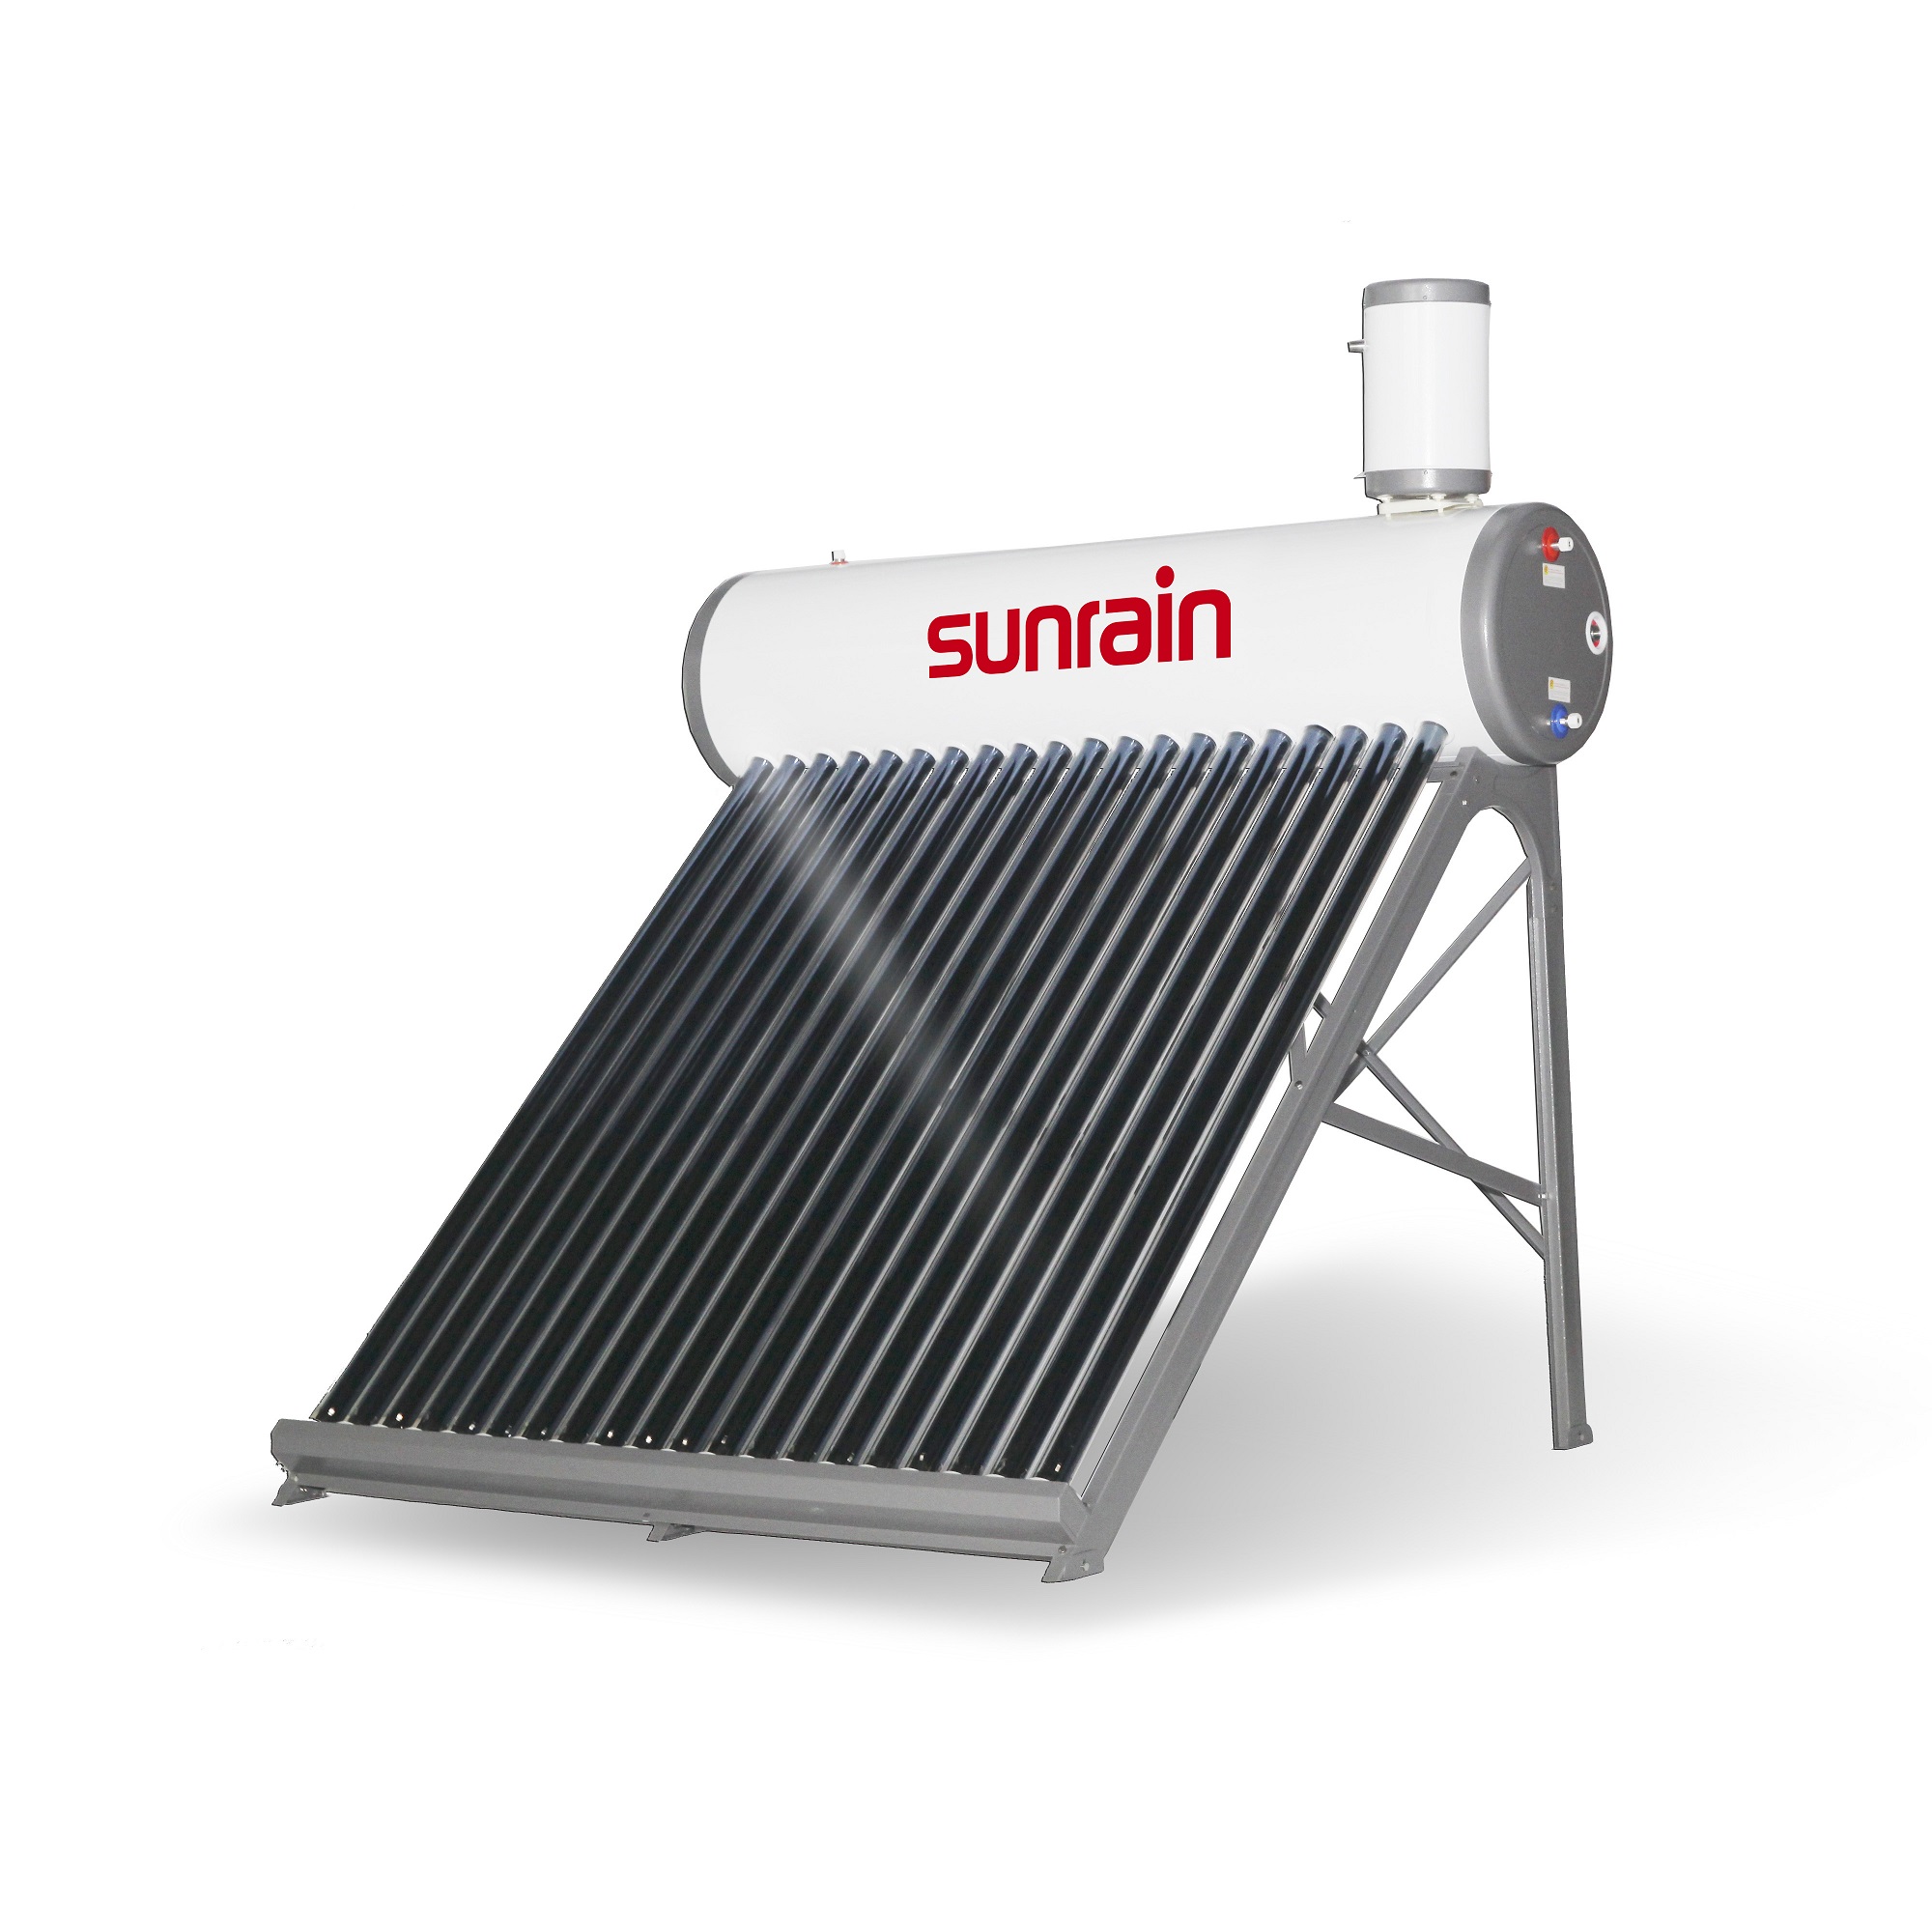 Pre-Heated Solar Water Heater with cooper coil exchanger